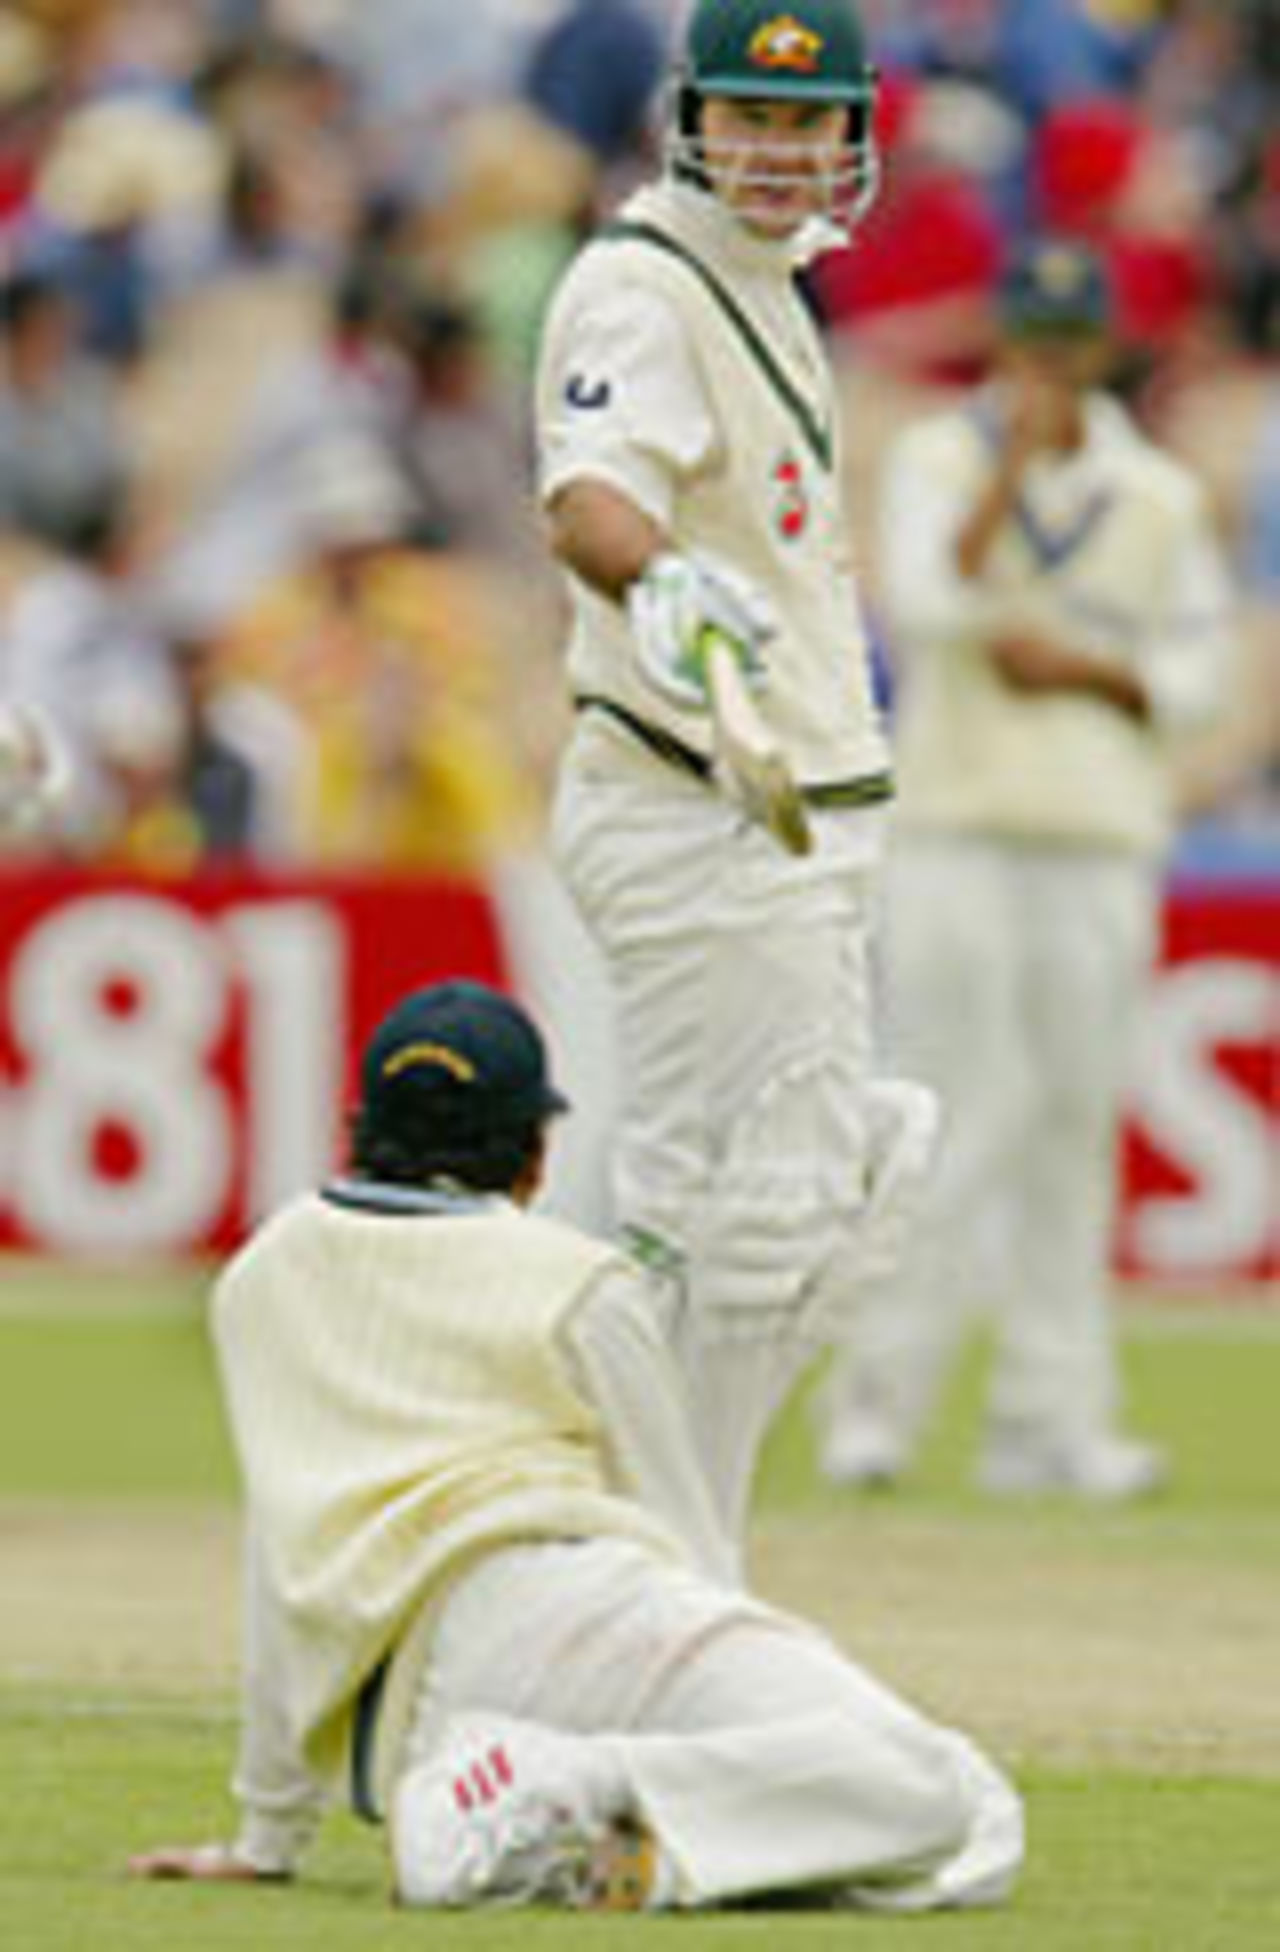 Ricky Ponting on his way to a first-day hundred, Australia v India, 2nd Test, Adelaide, 1st day, December 12, 2003